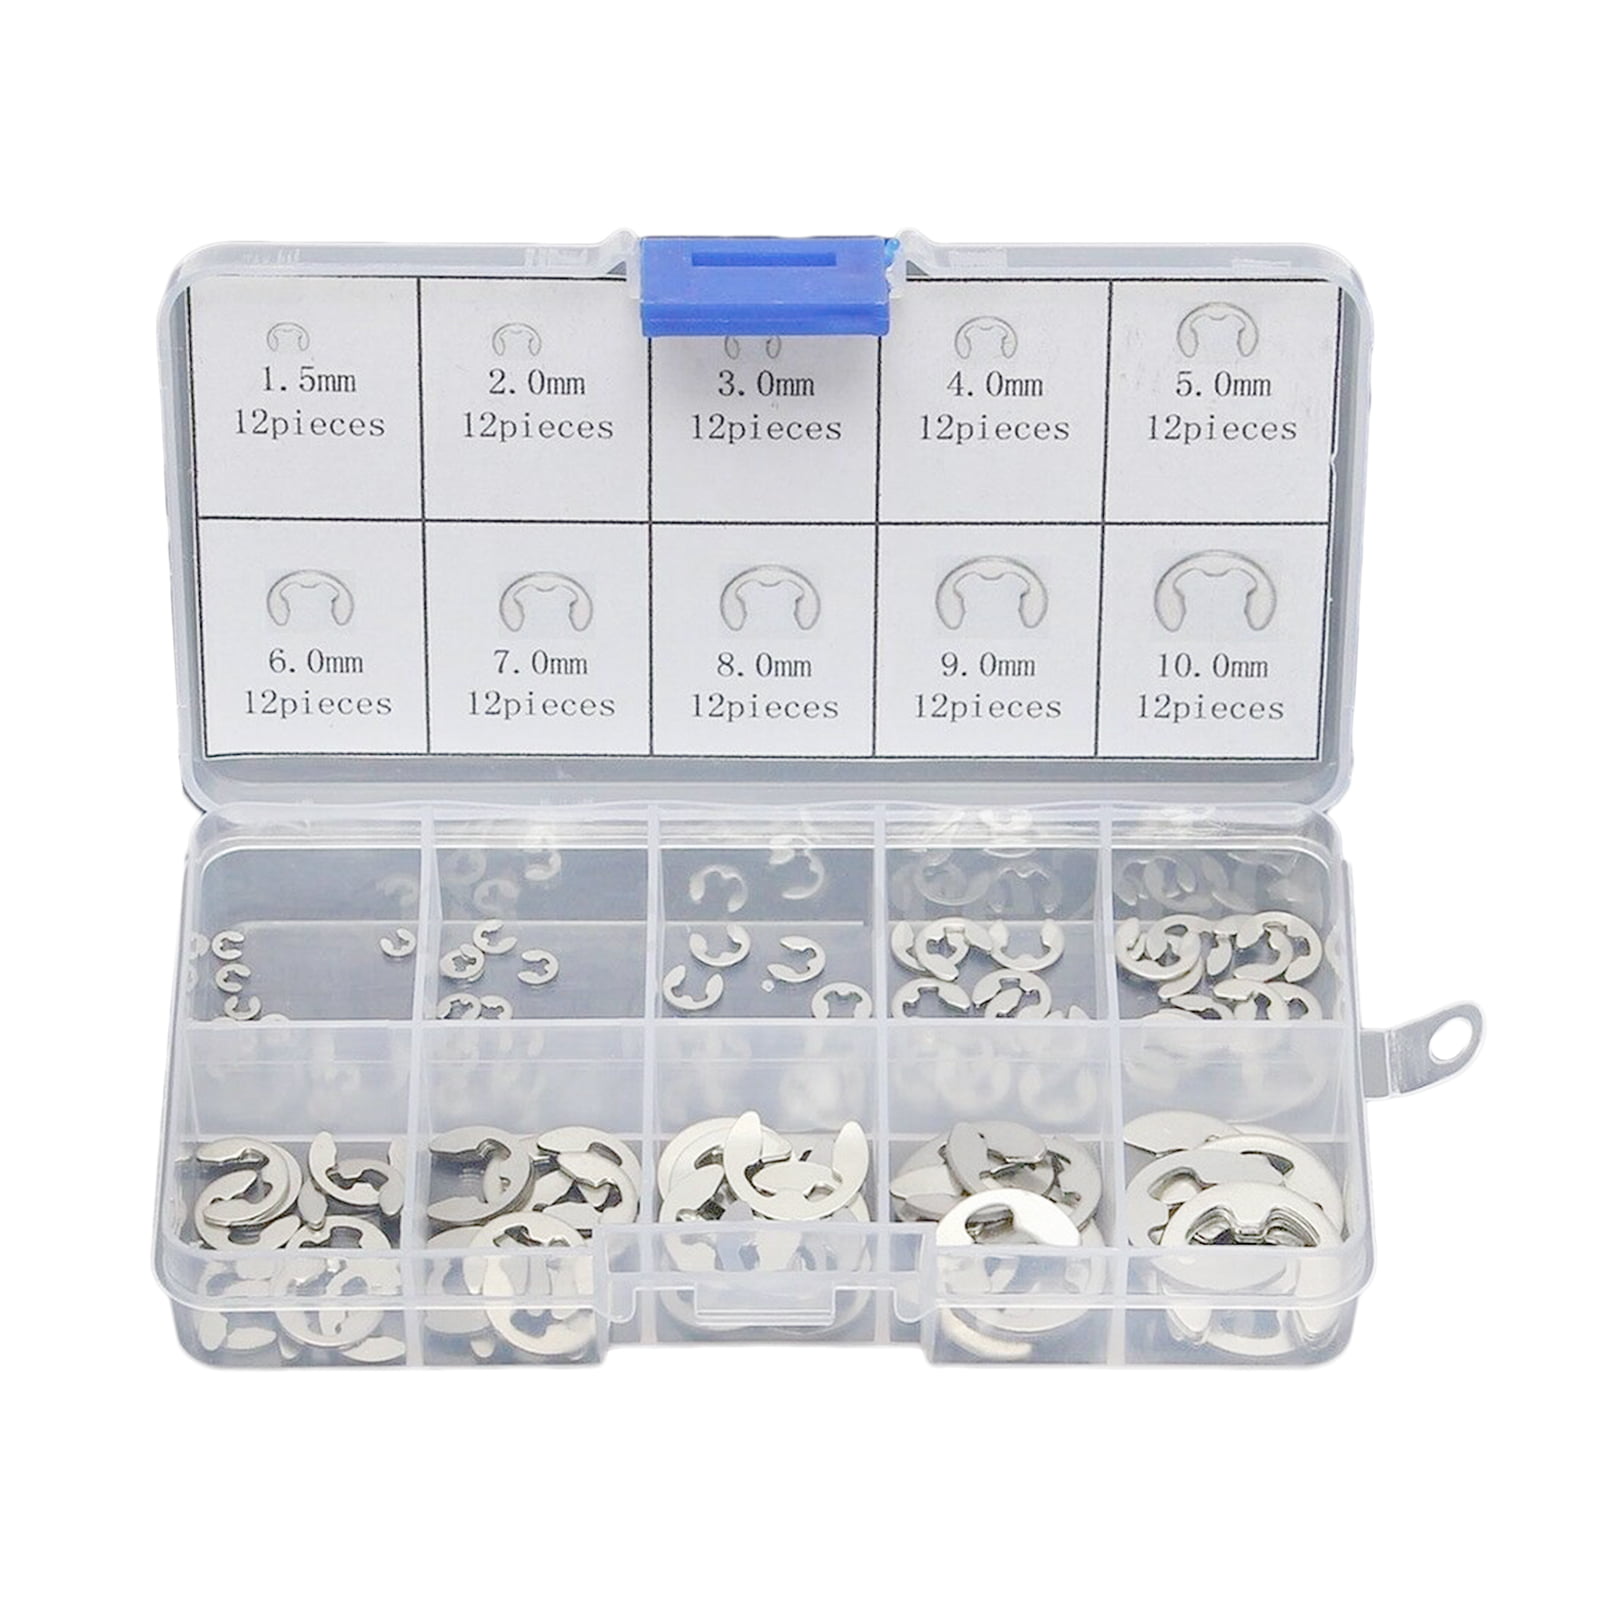 304 Stainless Steel E-Clip Retaining Circlip 1.5mm-10mm Assortment Parts Set Kit 